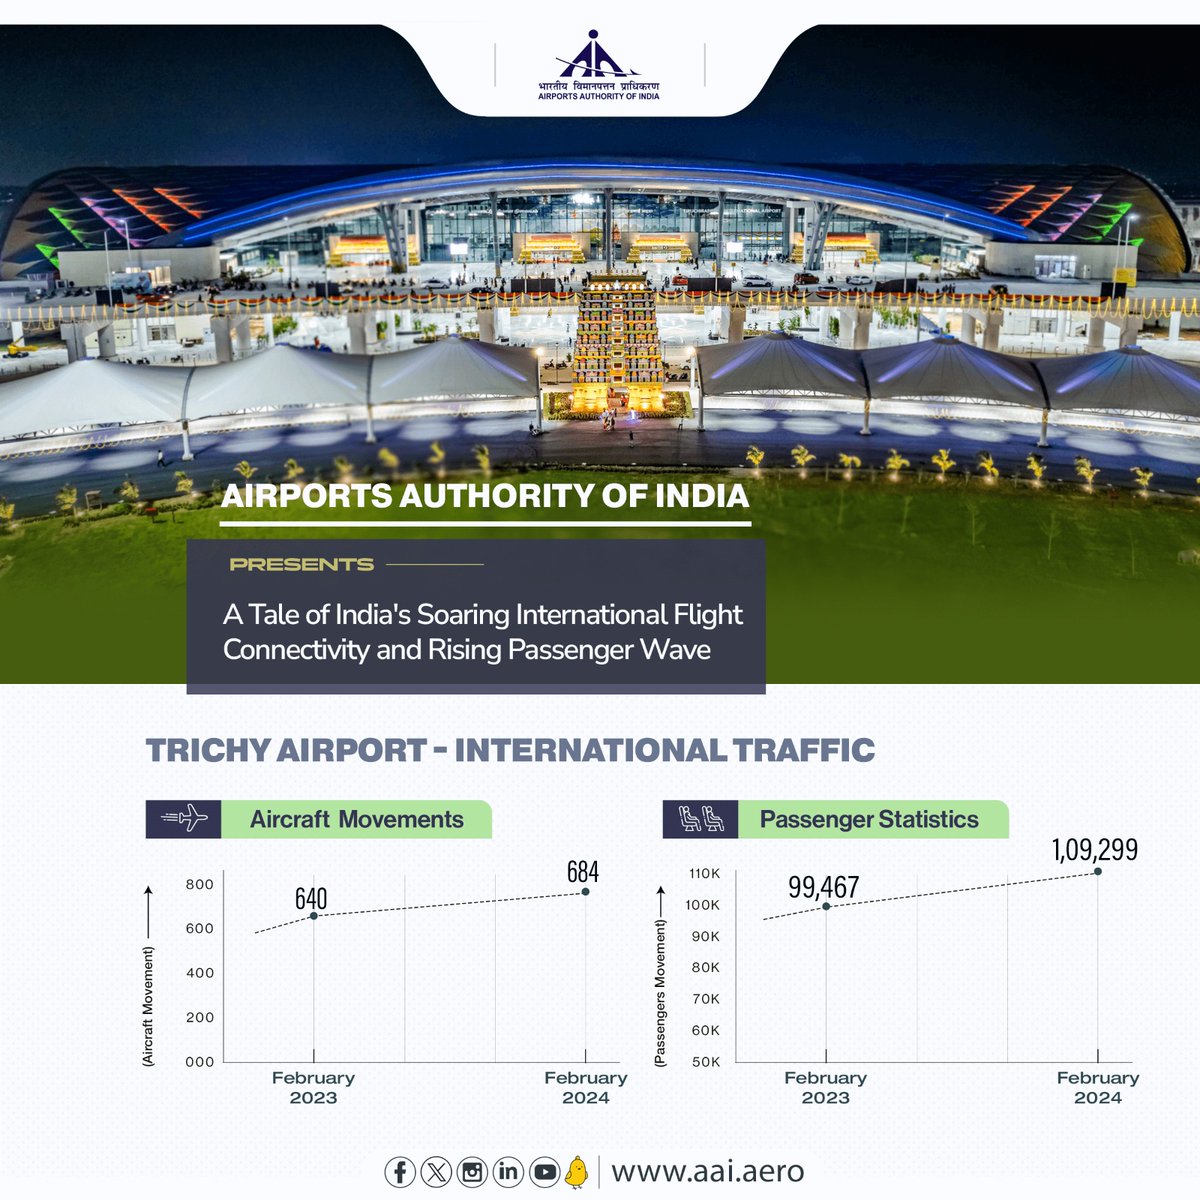 #AAI's #Trichy @aaiTRZairport is continually witnessing a substantial surge in international traffic, reflecting a robust growth trajectory in the state’s Civil Aviation Industry. The airport handled 640 International Aircraft Movements in Feb’23 which hiked to 684 International